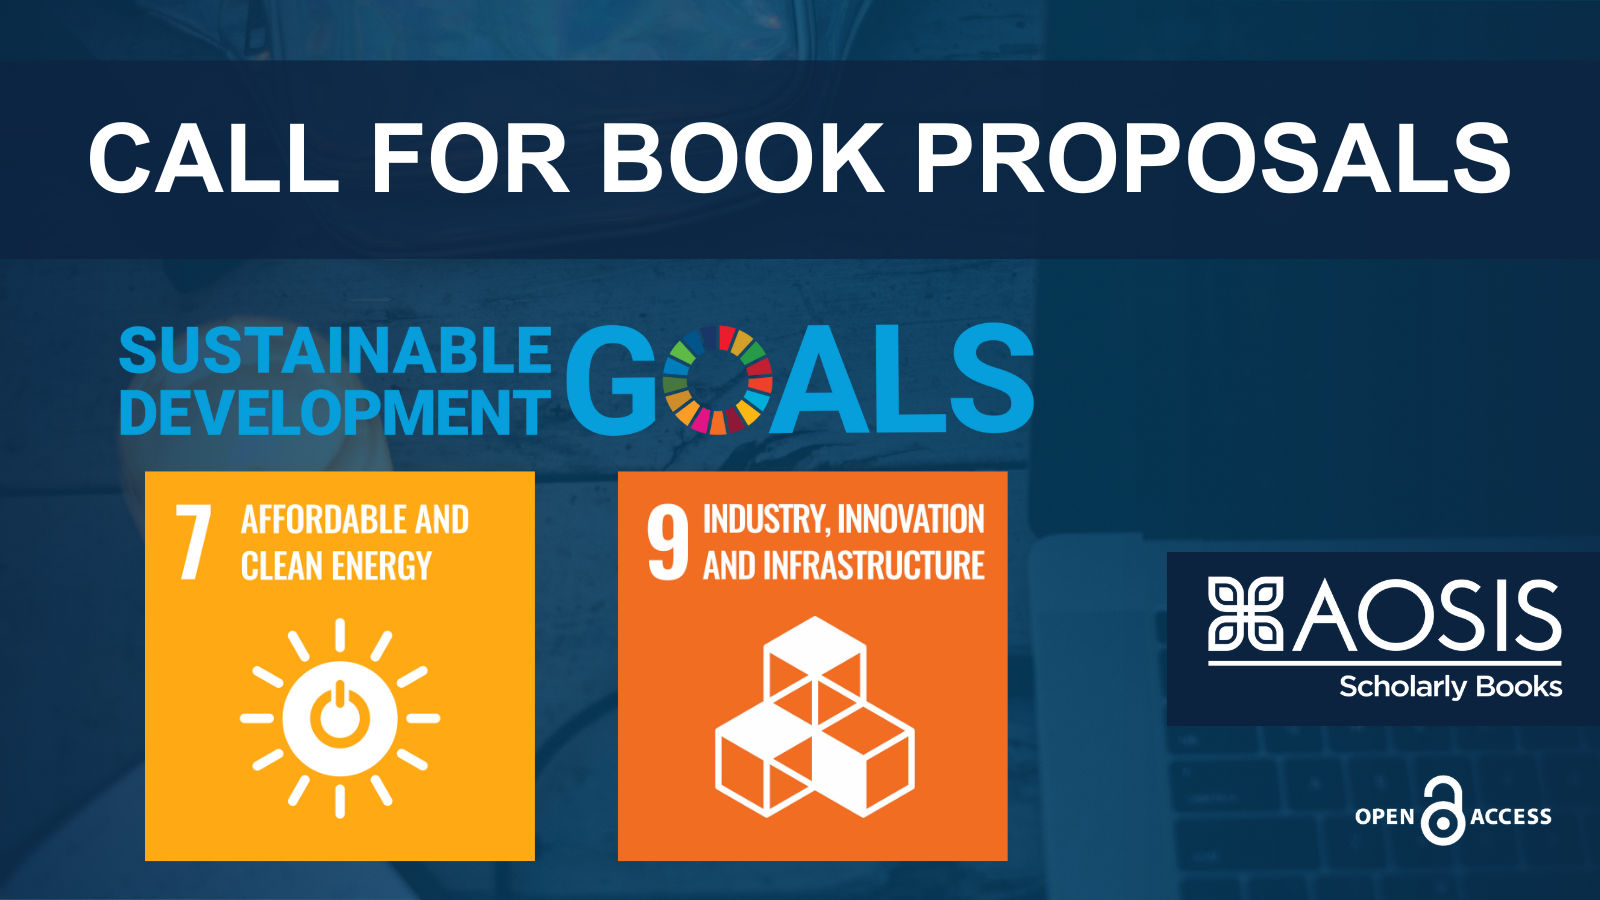 Call for book proposals